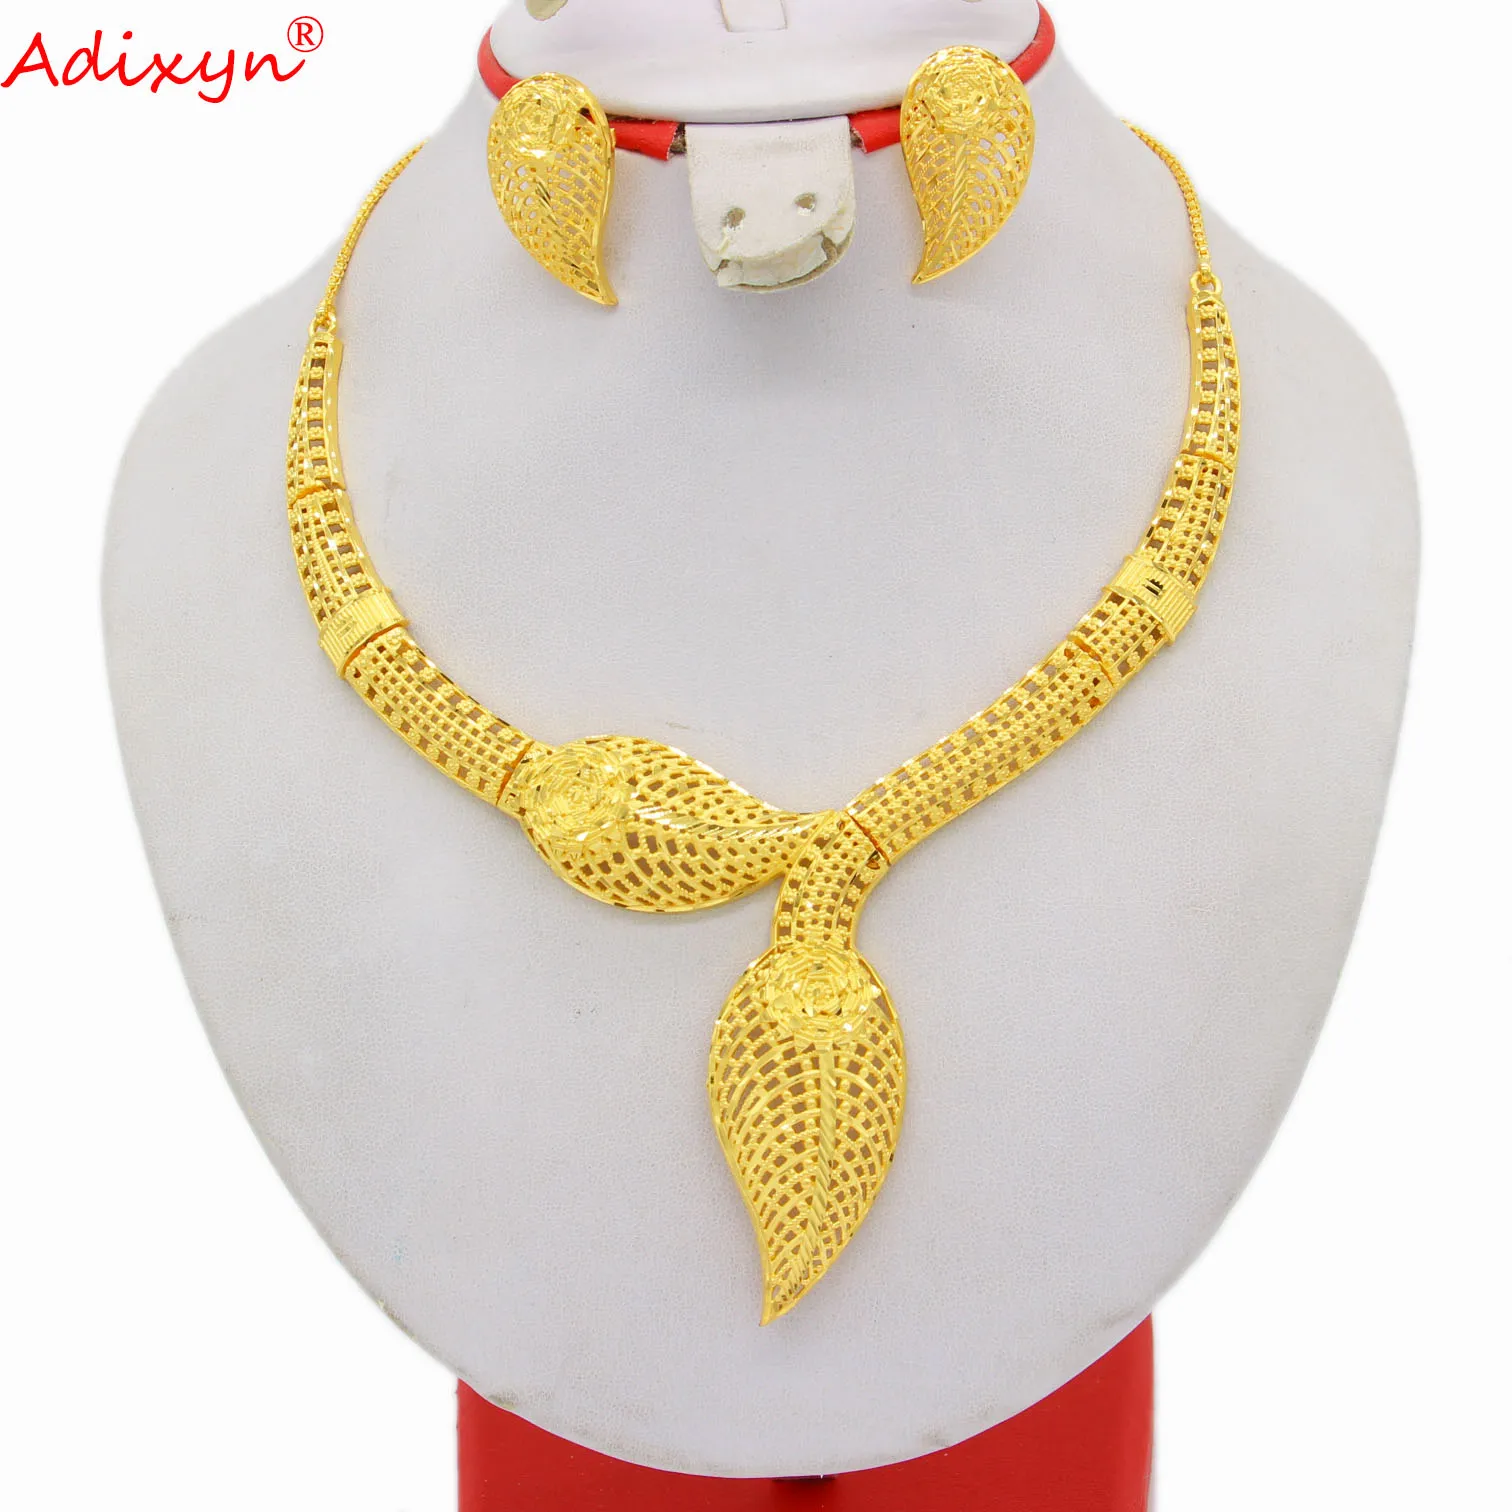 Adixyn Dubai Jewelry-sets Necklaces Earrings 24k Gold Color African Jewelry Arab Wedding Accessories N04071